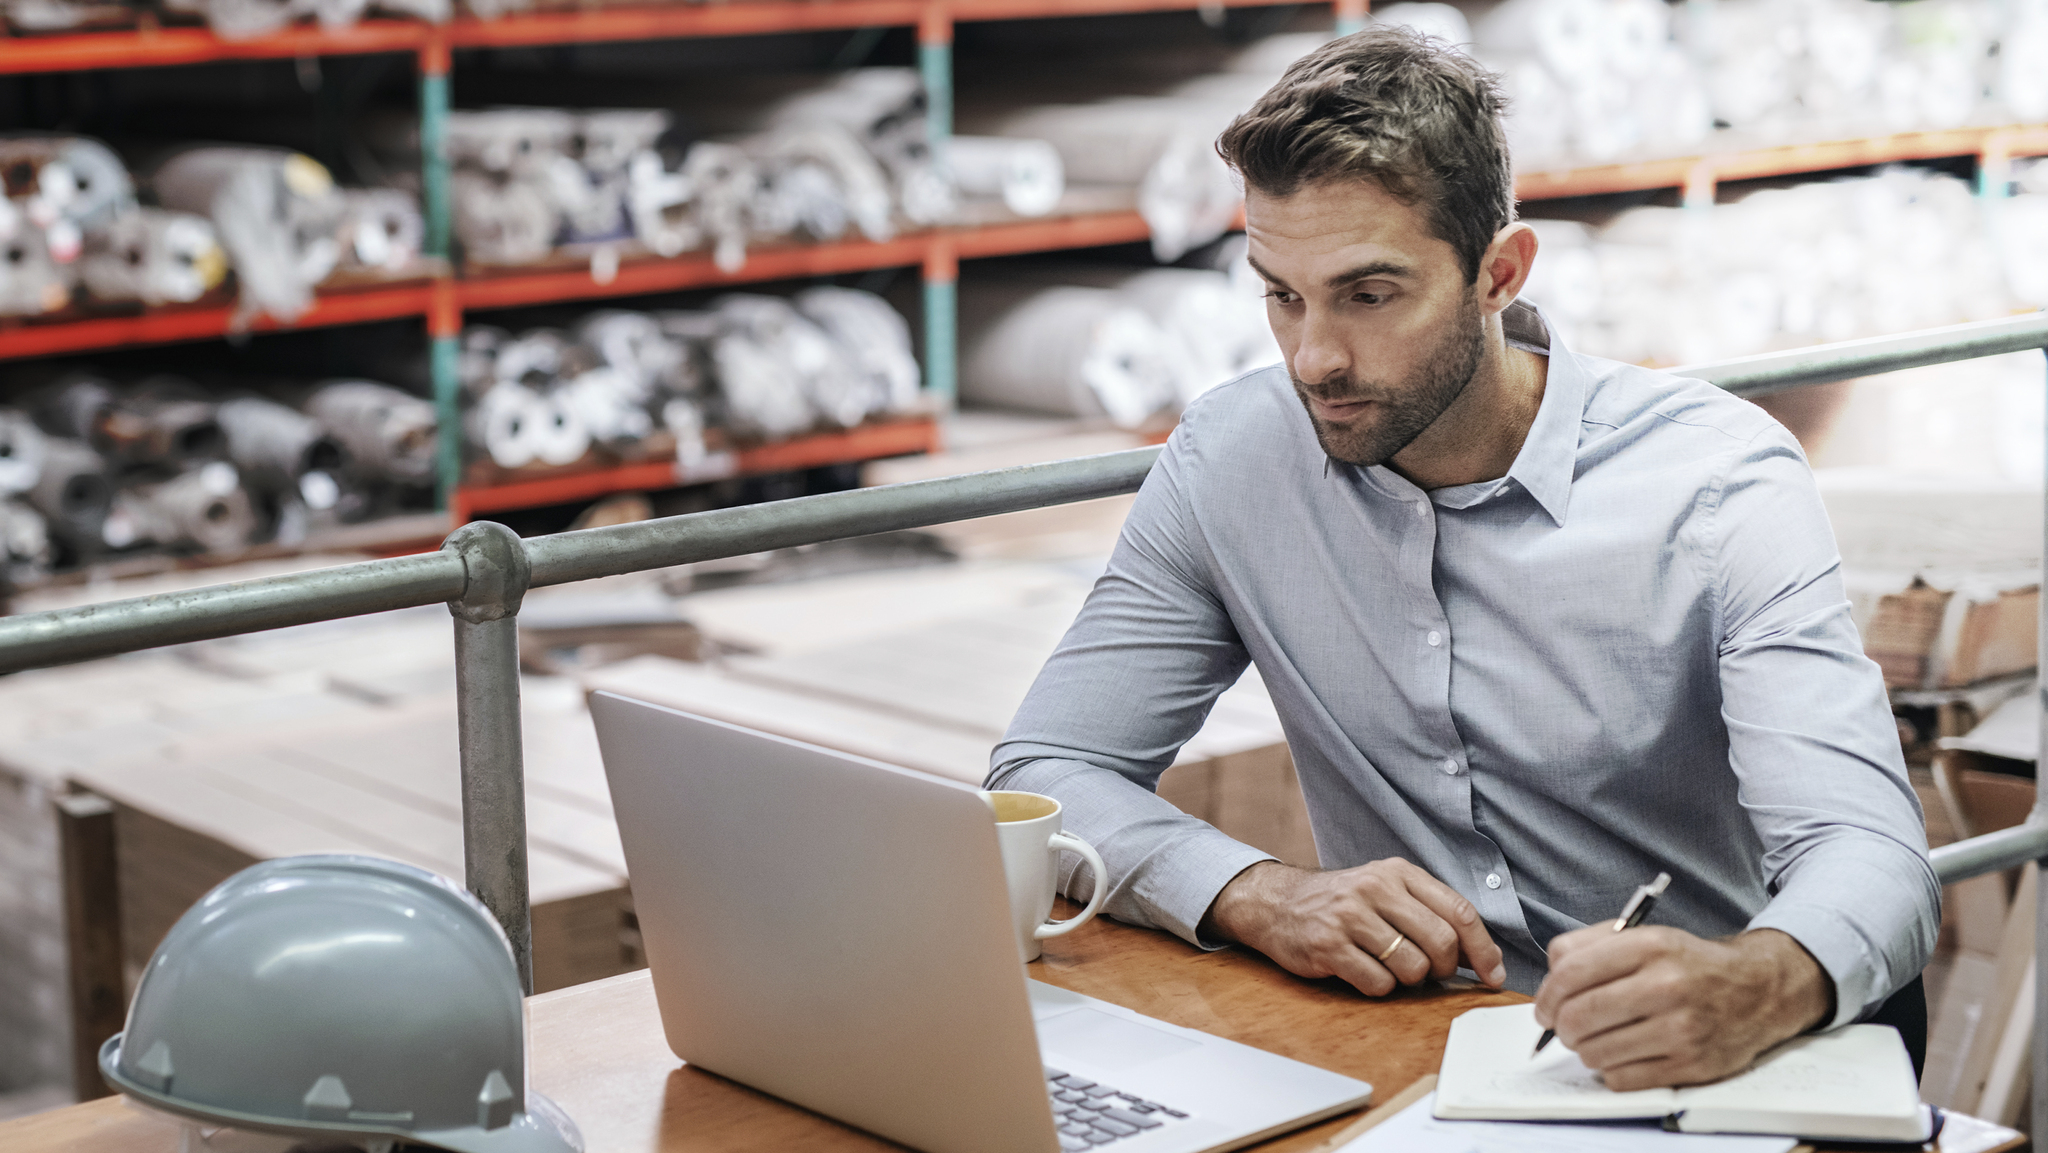 man in button up shirt working in warehouse looking at laptop